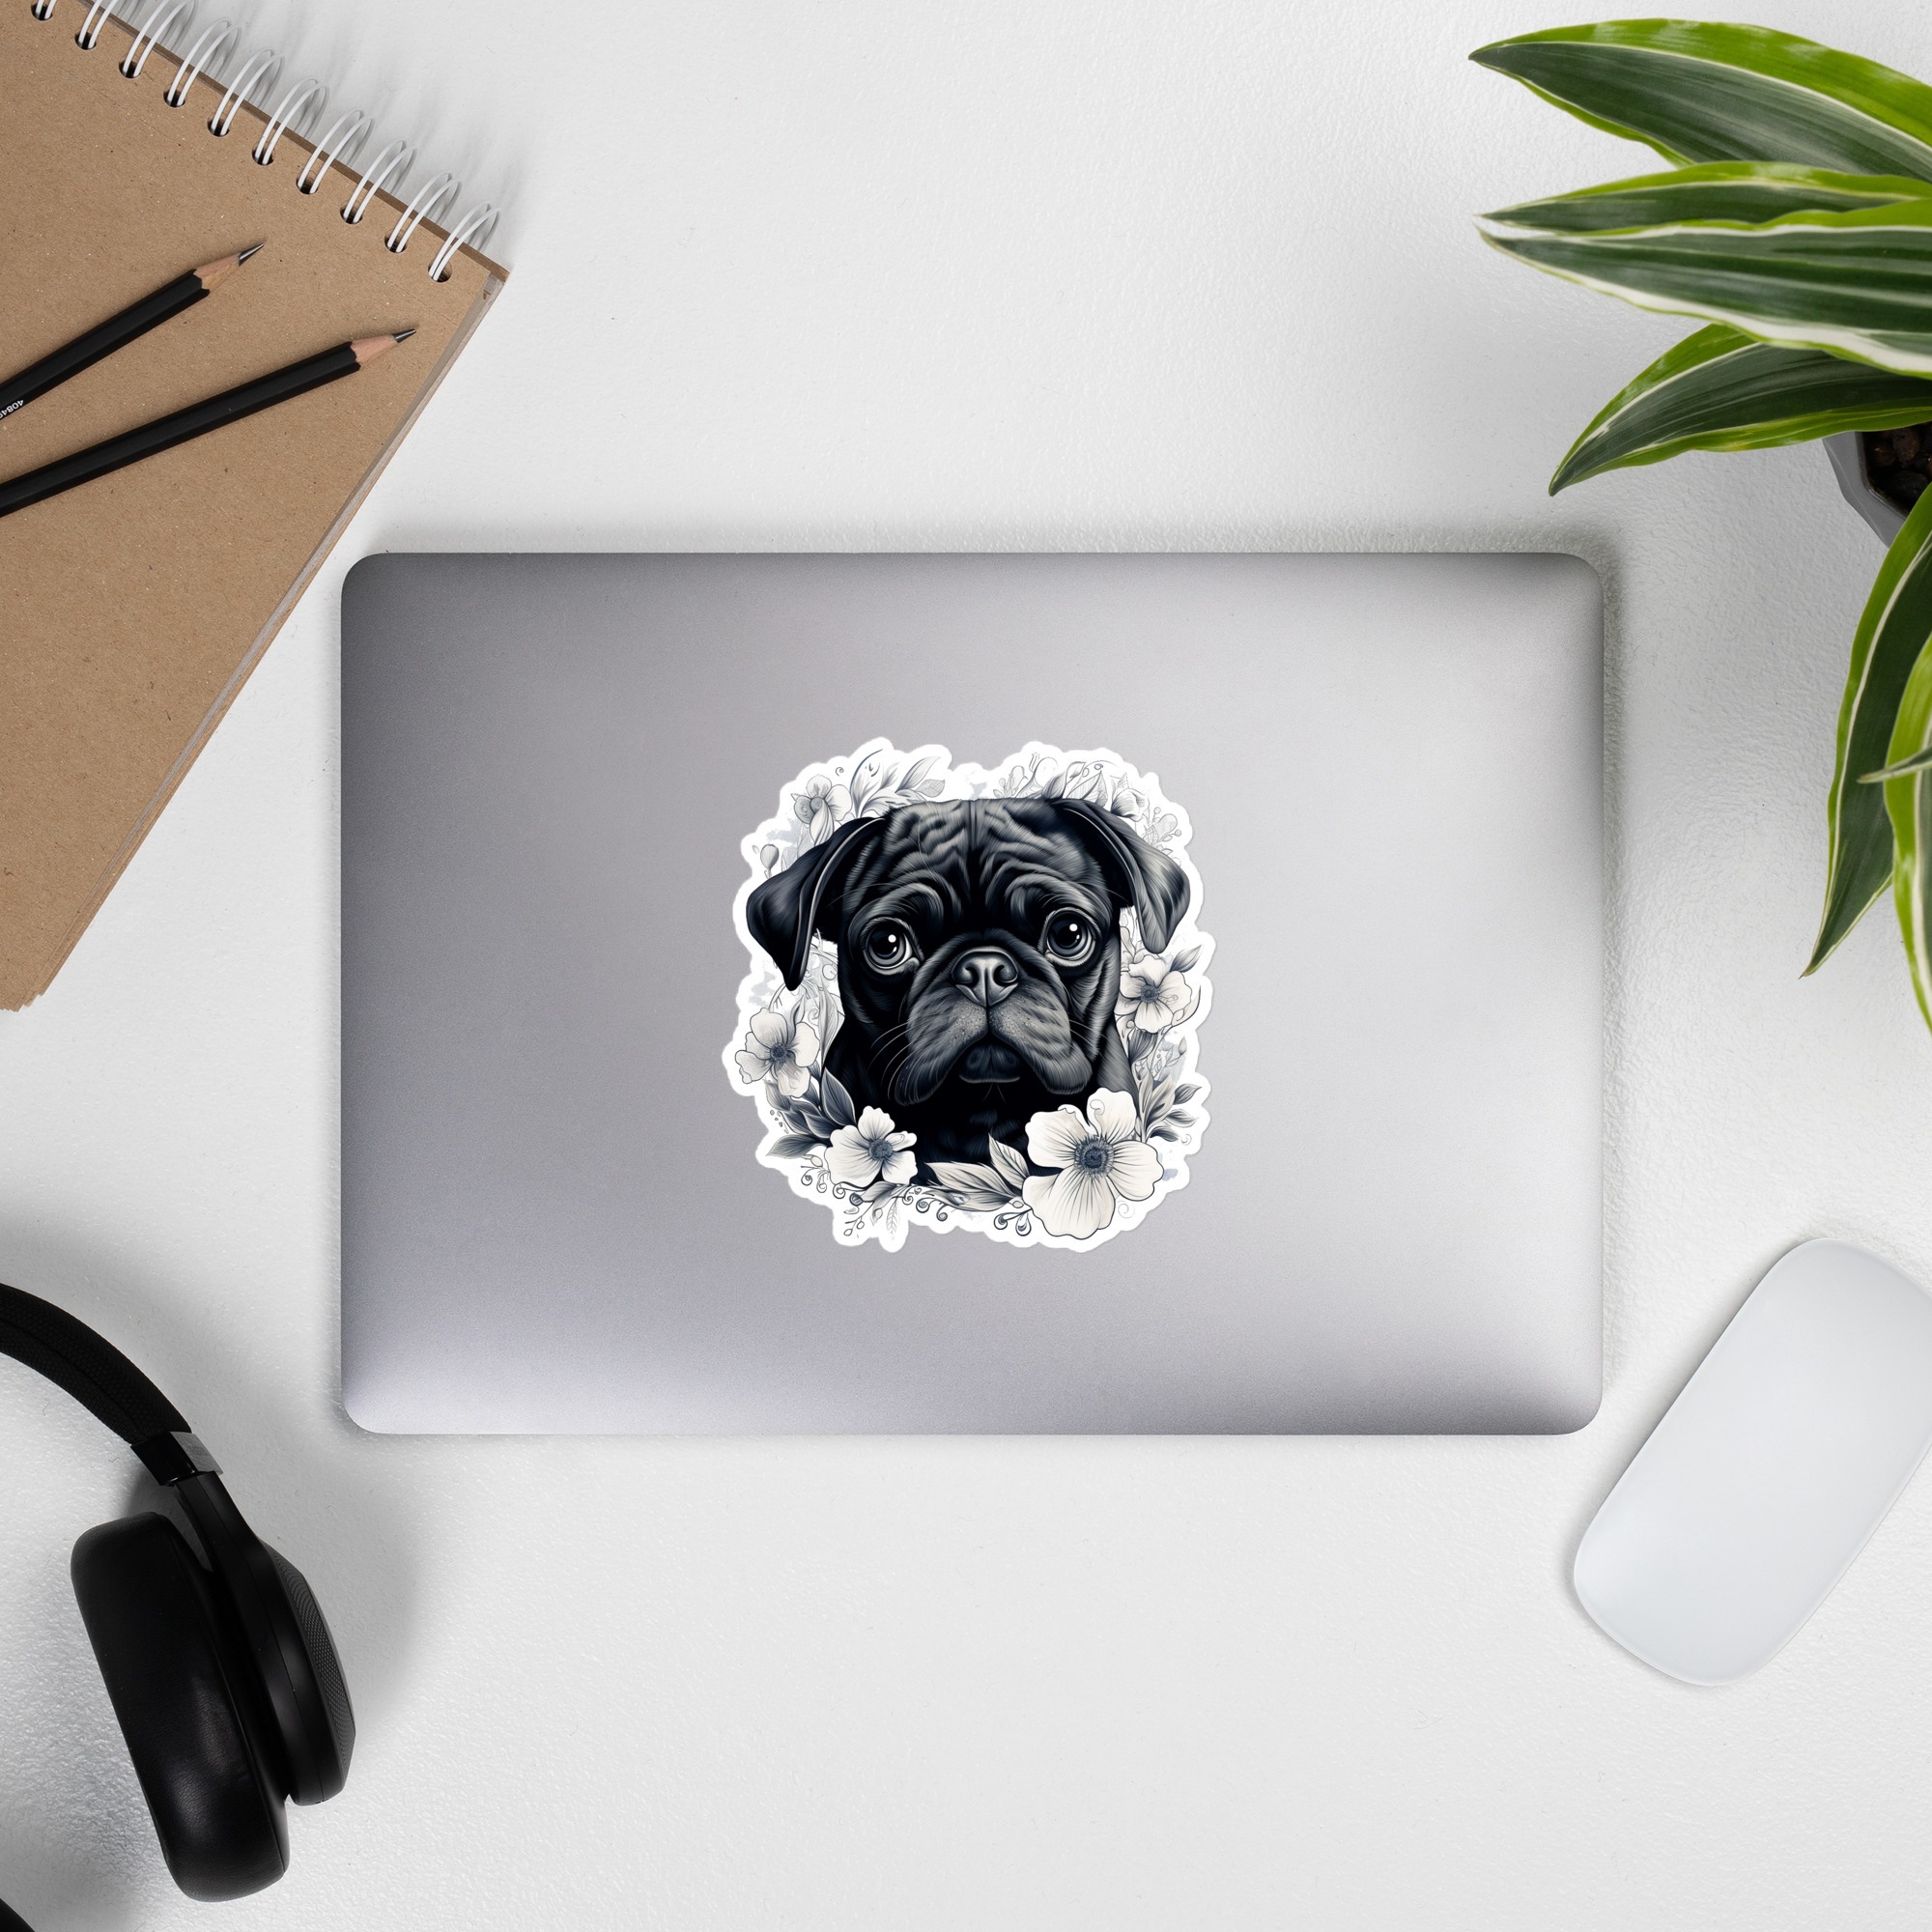 Jett the Lovable Pug | Bubble-free stickers